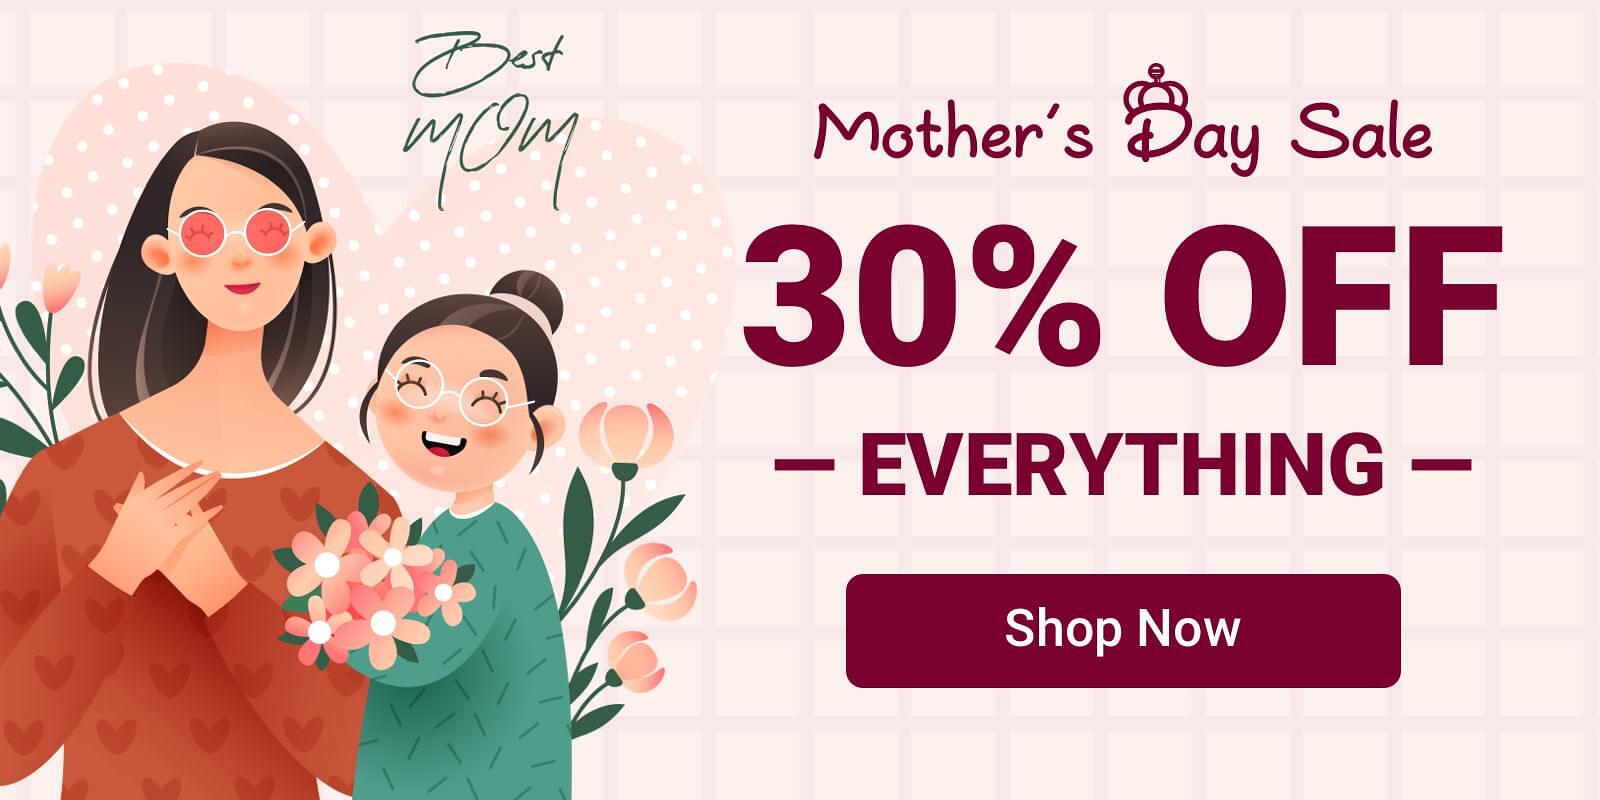 Mother's Day Sale: 30% Off ALL Eyewear